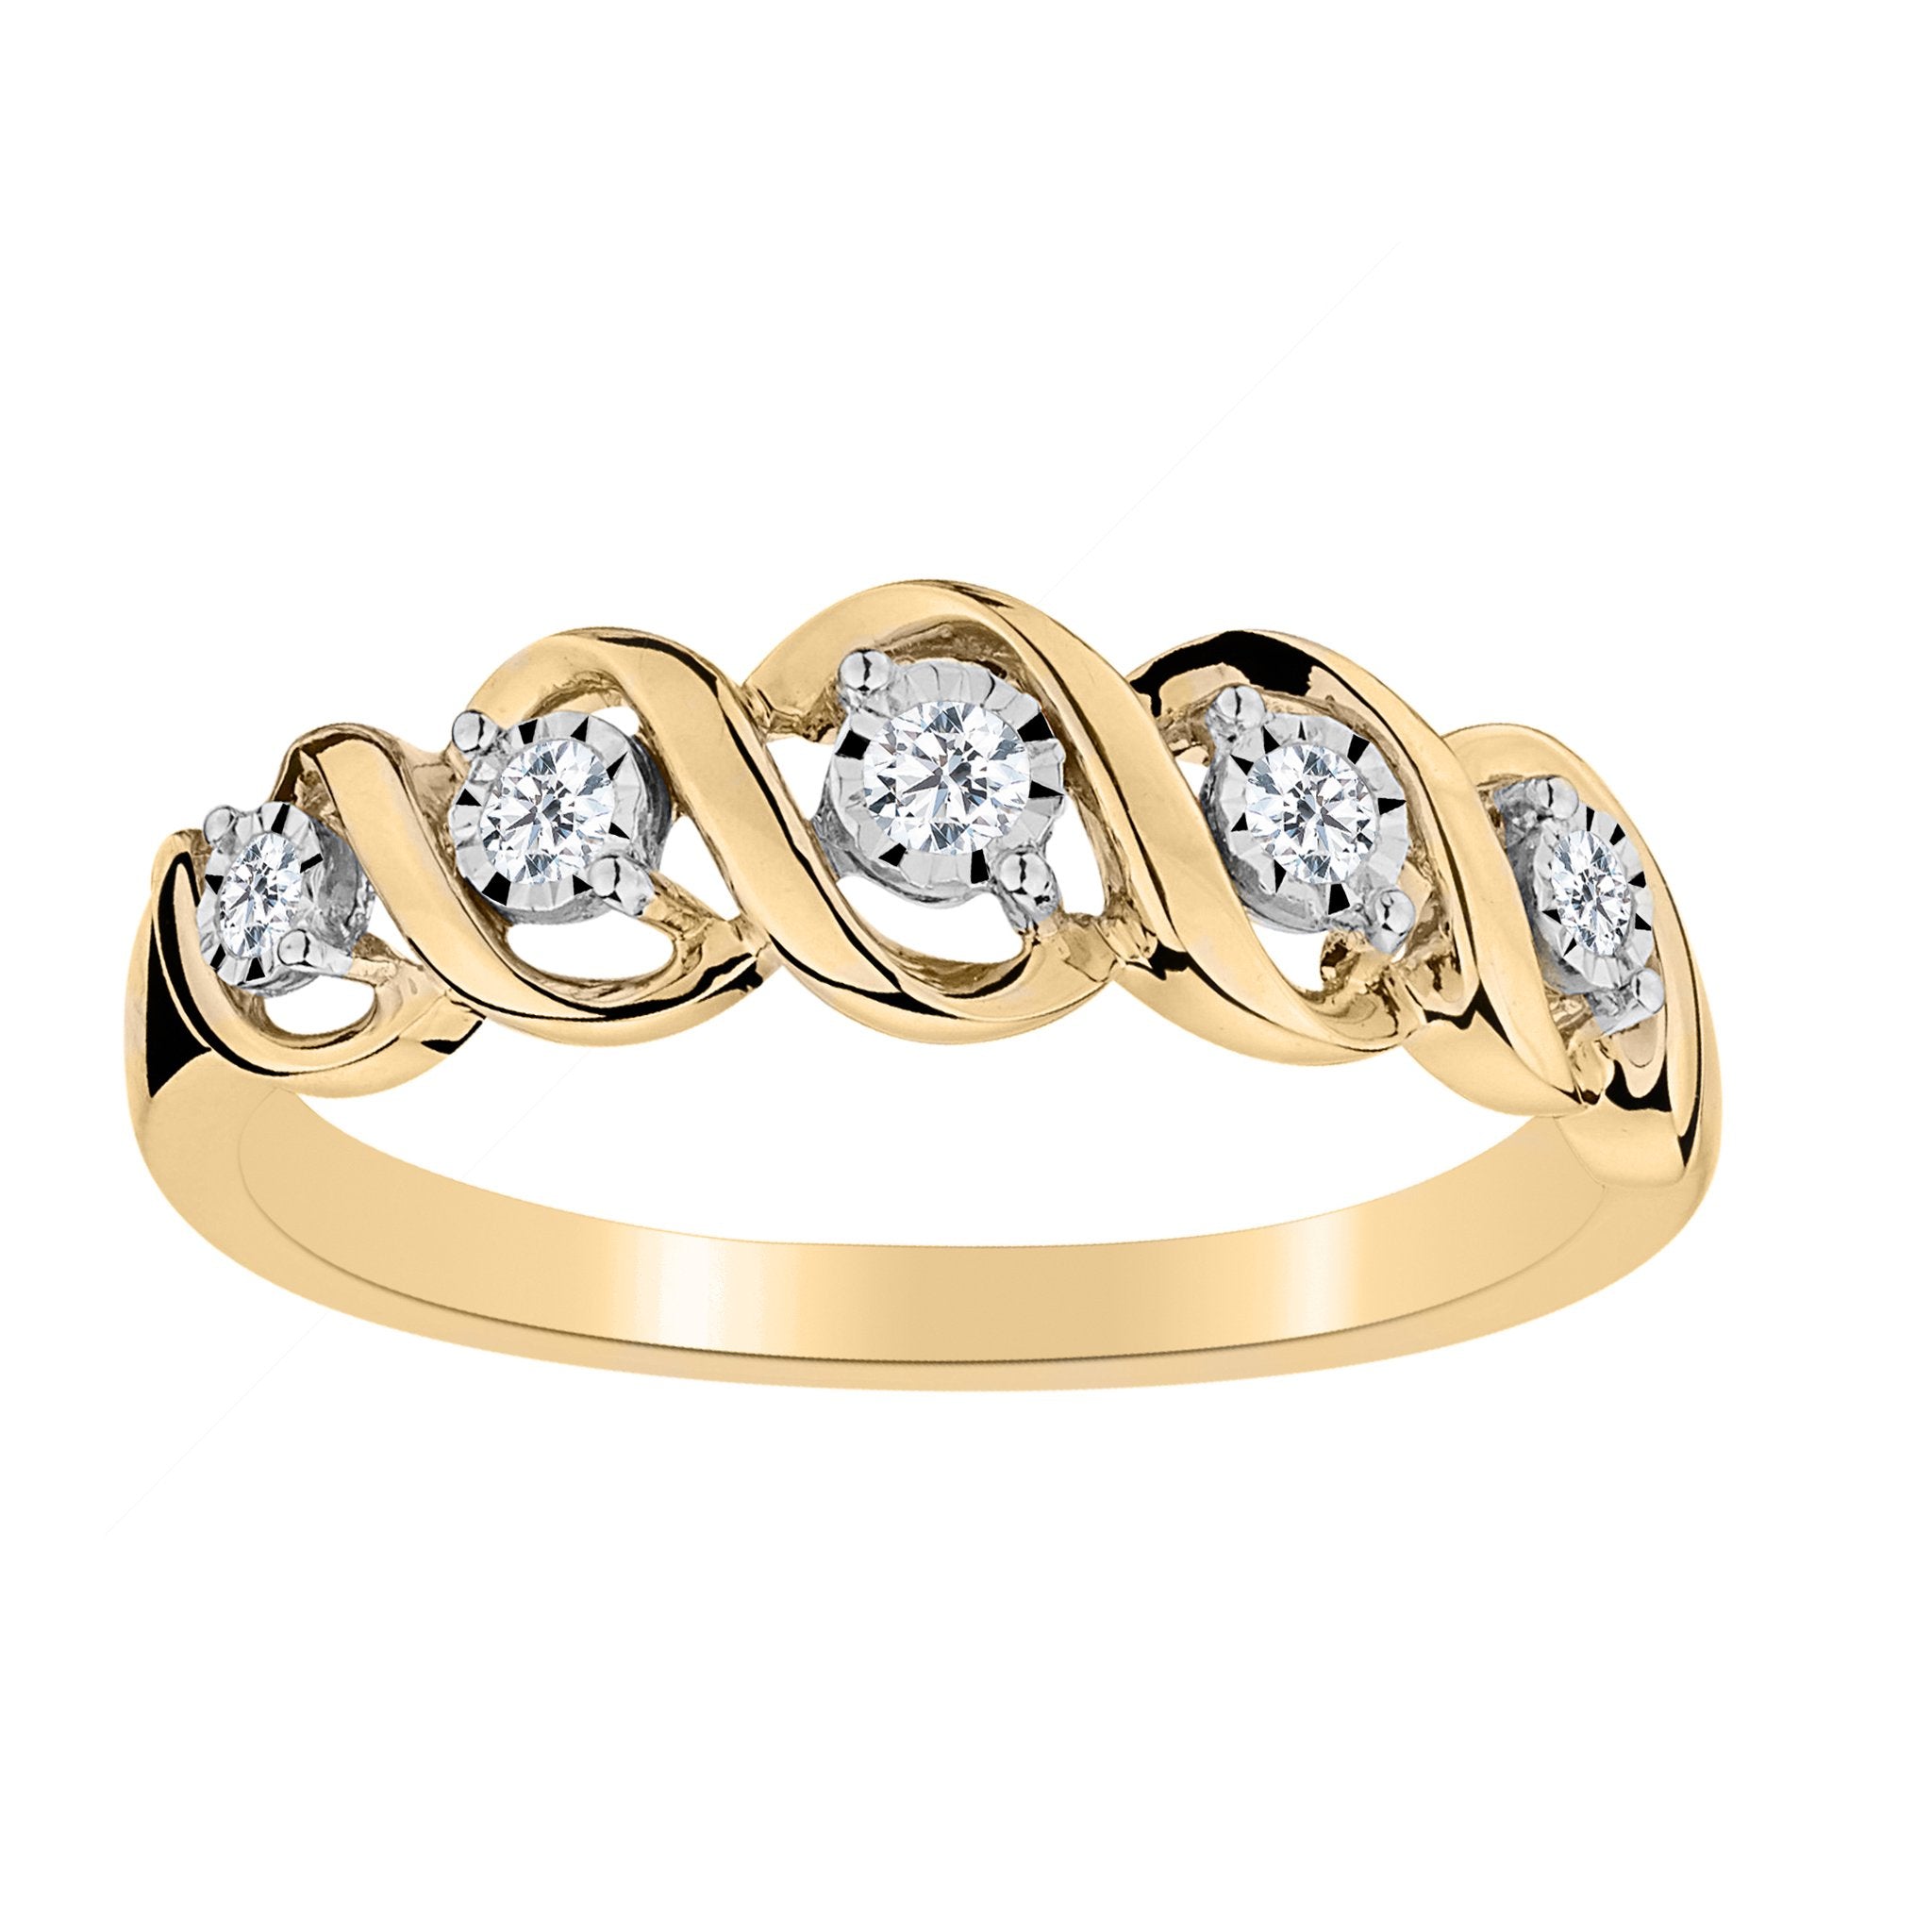 .15 CARAT DIAMOND RING,10kt YELLOW GOLD. Fashion Rings - Griffin Jewellery Designs